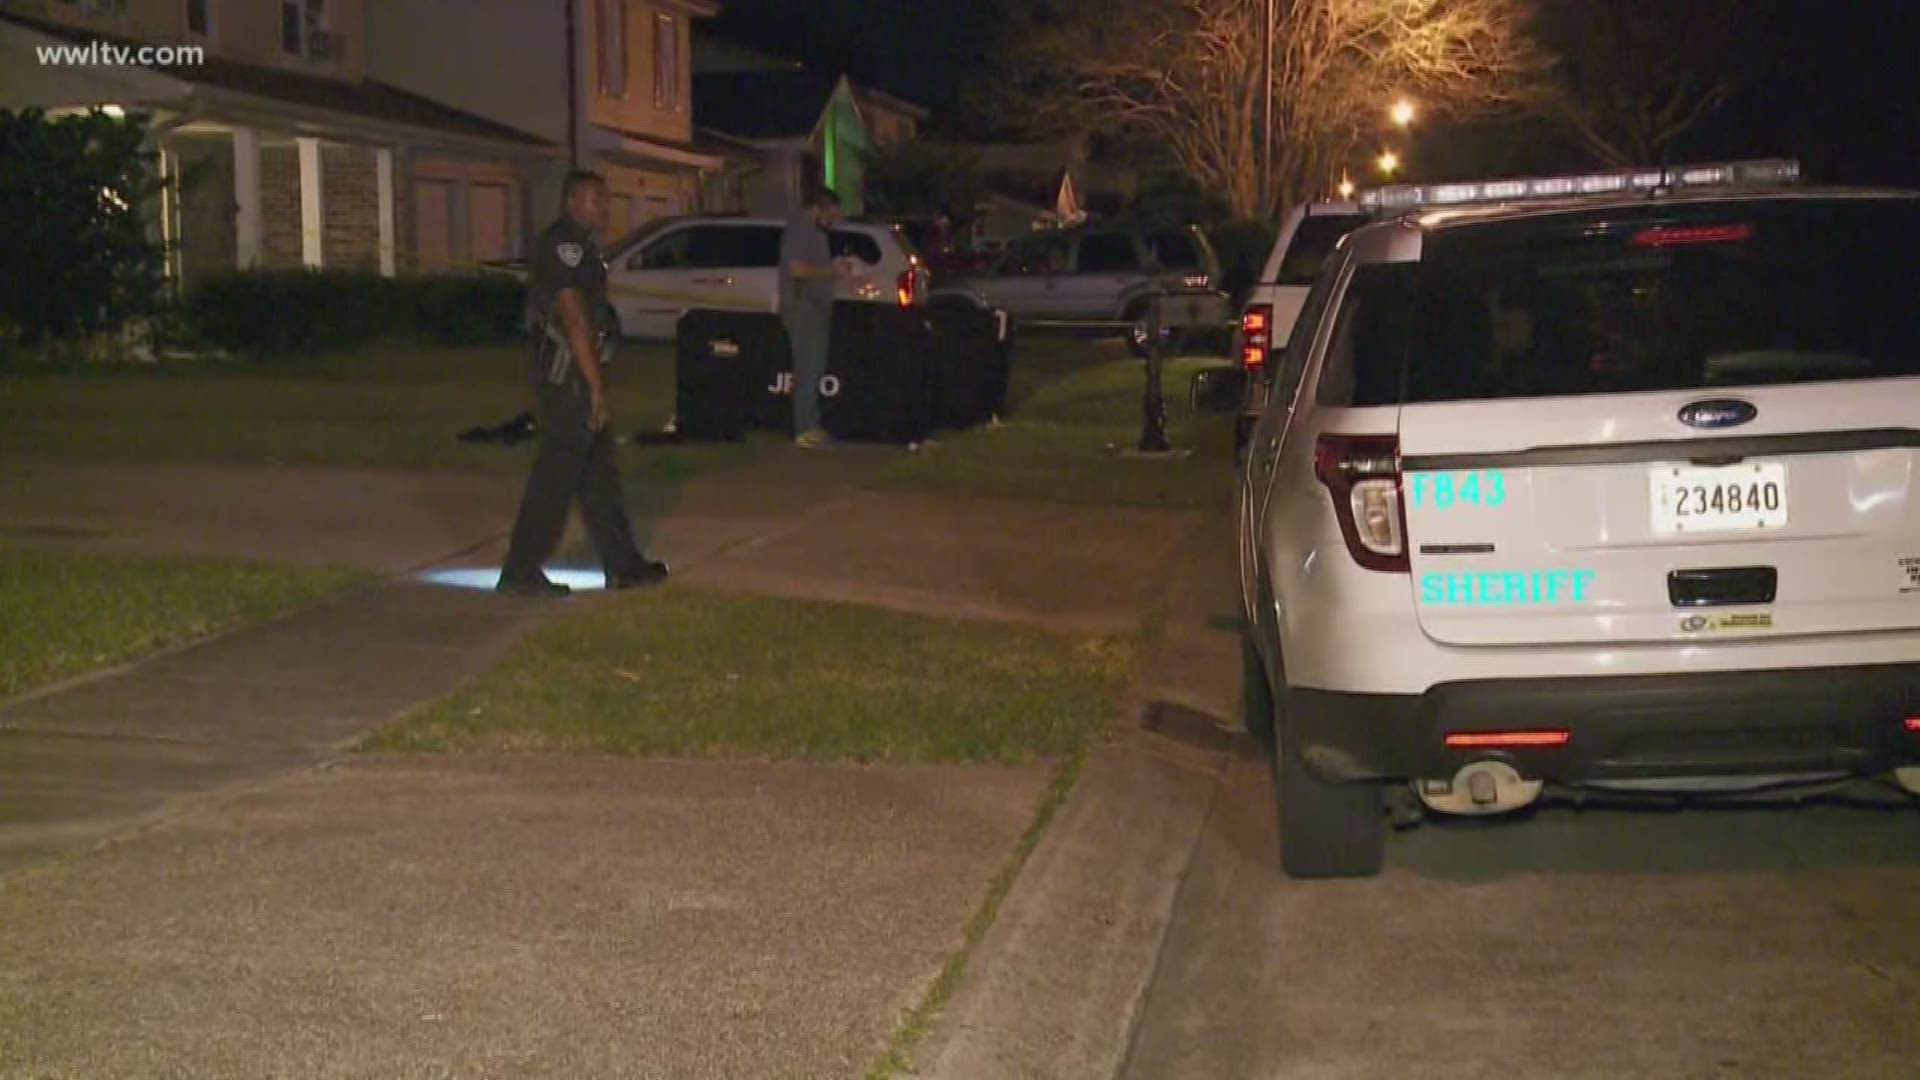 The shooting happened after two neighbors had a dispute, a Jefferson Parish Sheriff's Office spokesperson said.